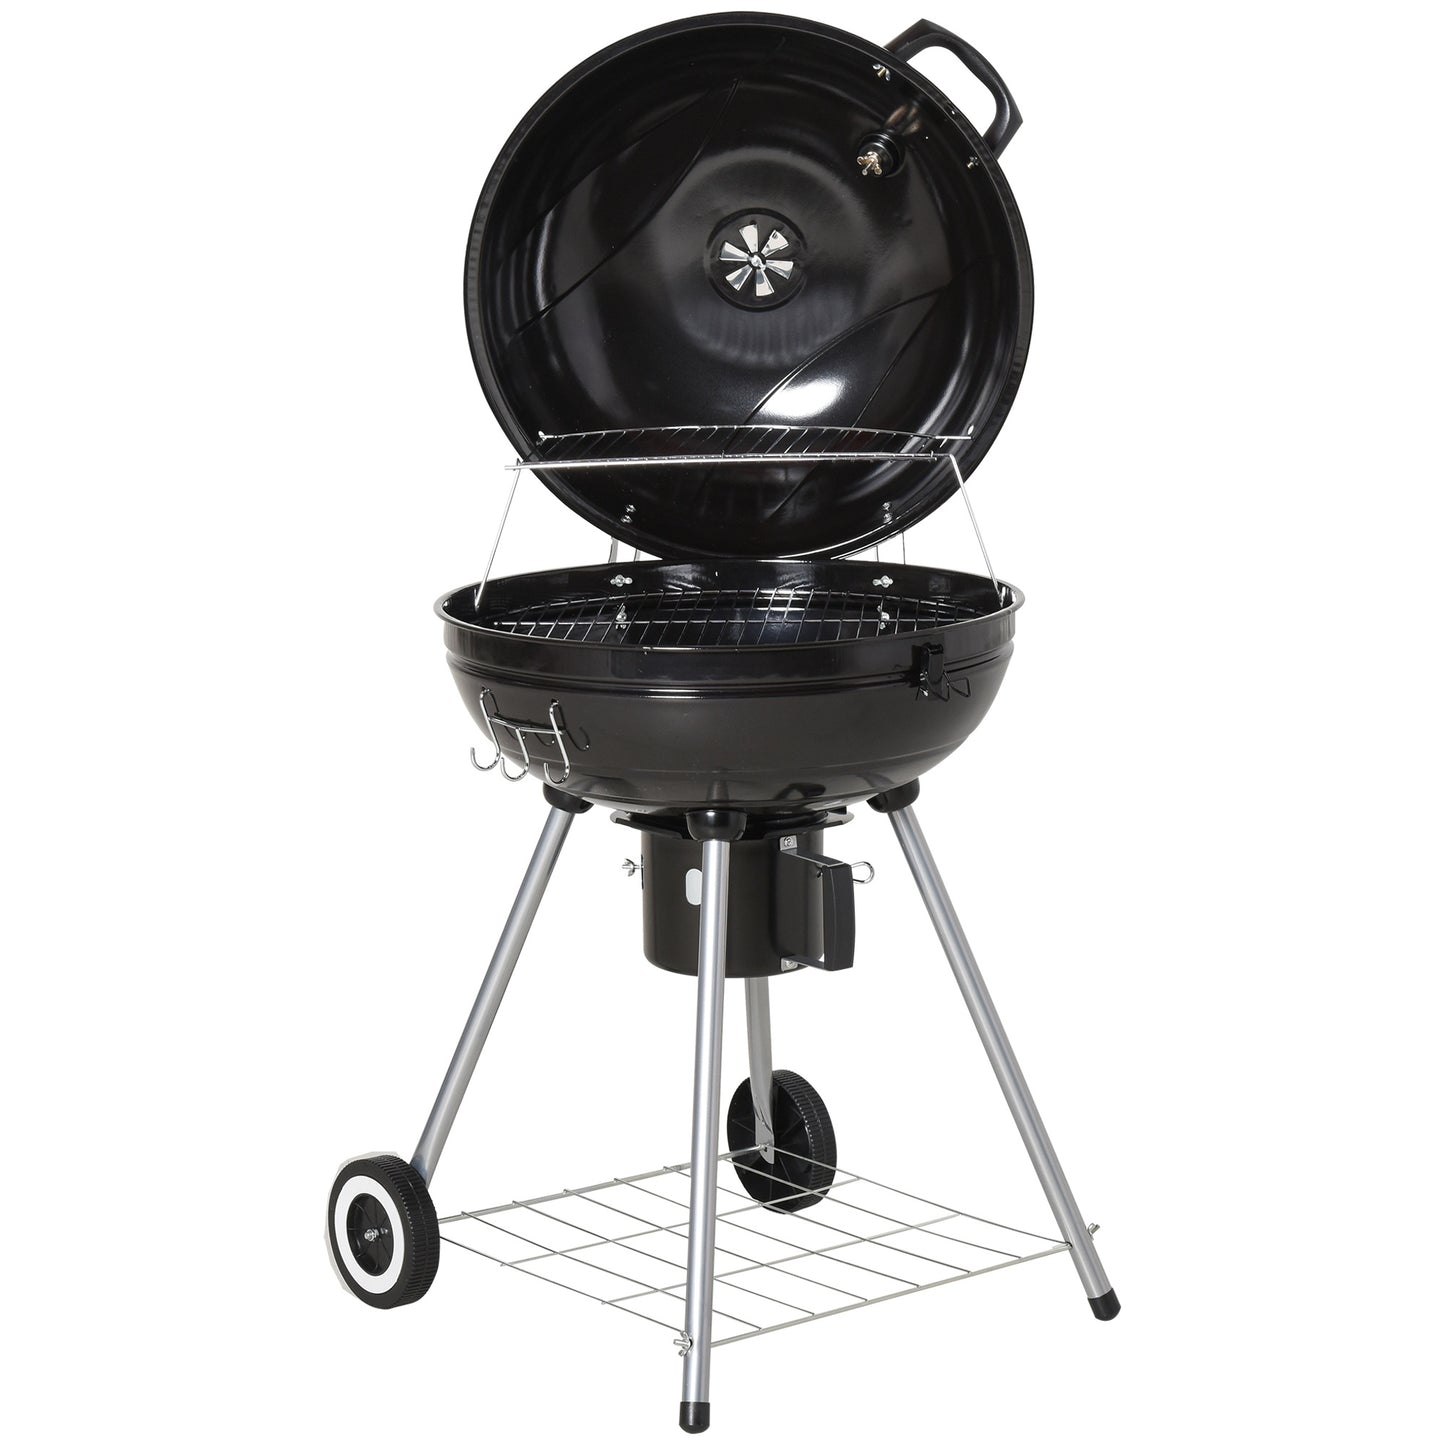 Outsunny Portable Kettle Charcoal Grill W/Wheels, 57Lx63Wx94H cm-Black/Silver